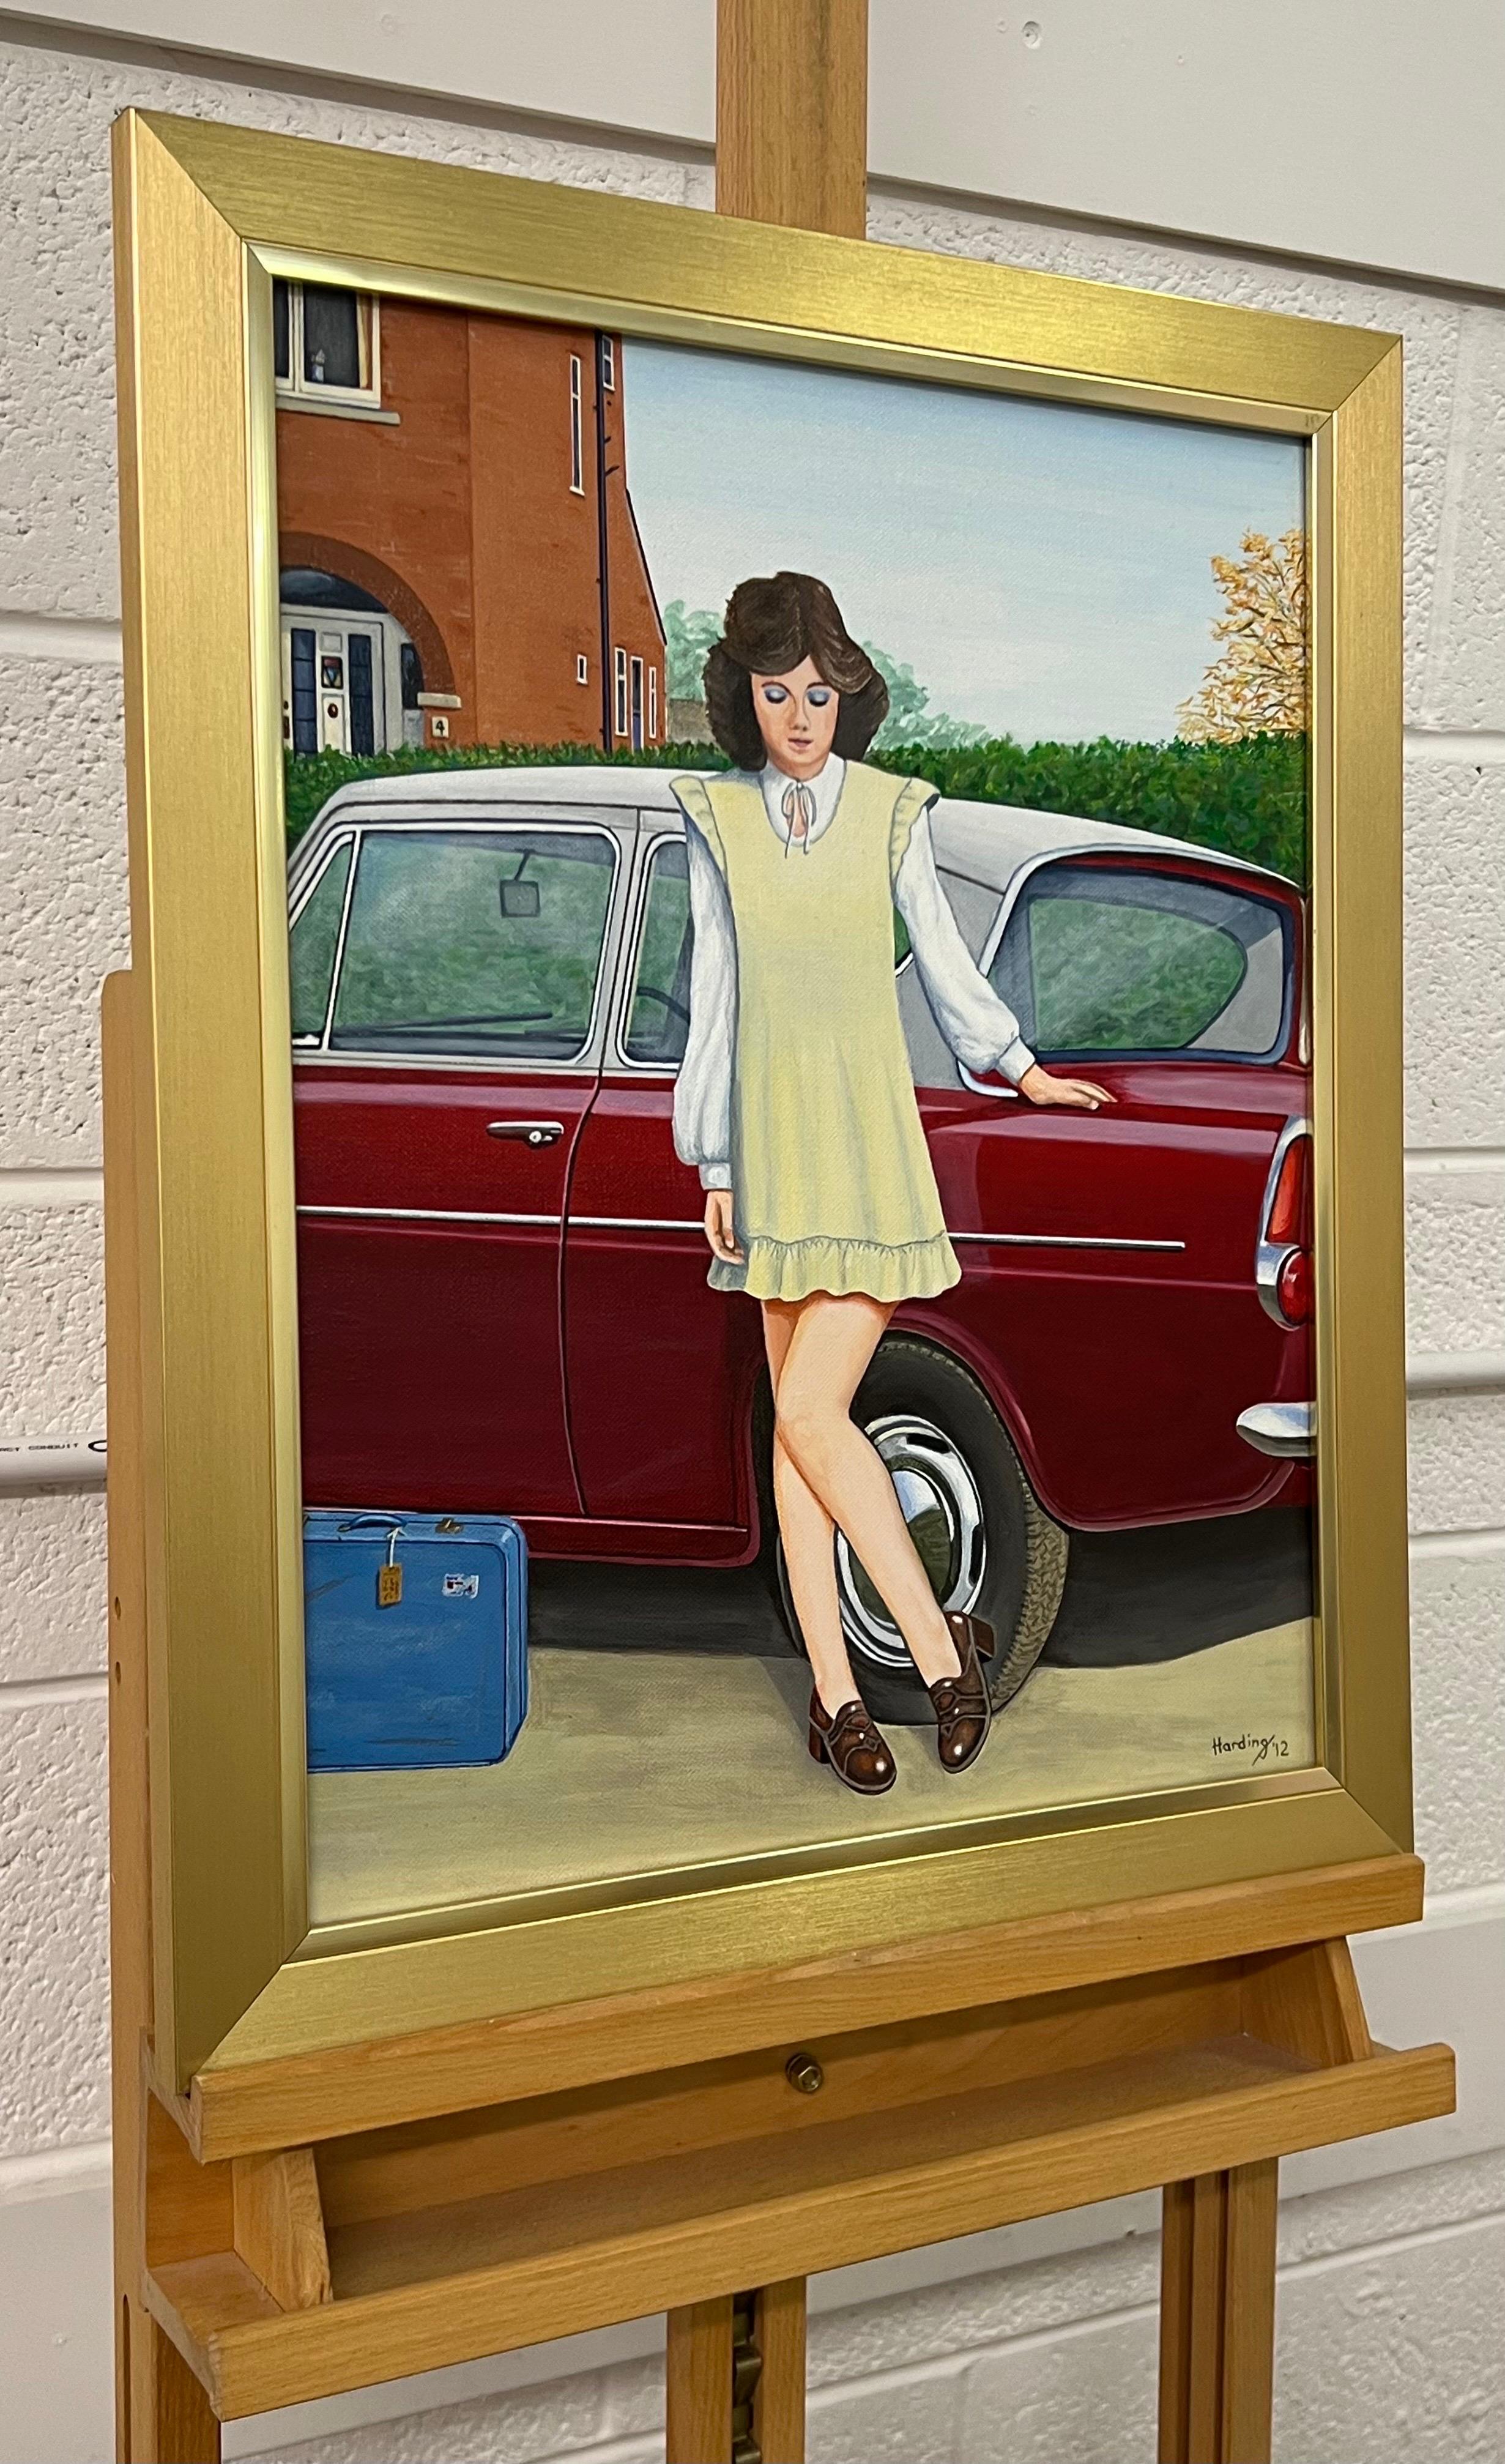 Vintage English Woman in Suburbia with Classic Ford Car 1960's 1970's England  - Painting by Paul F Harding